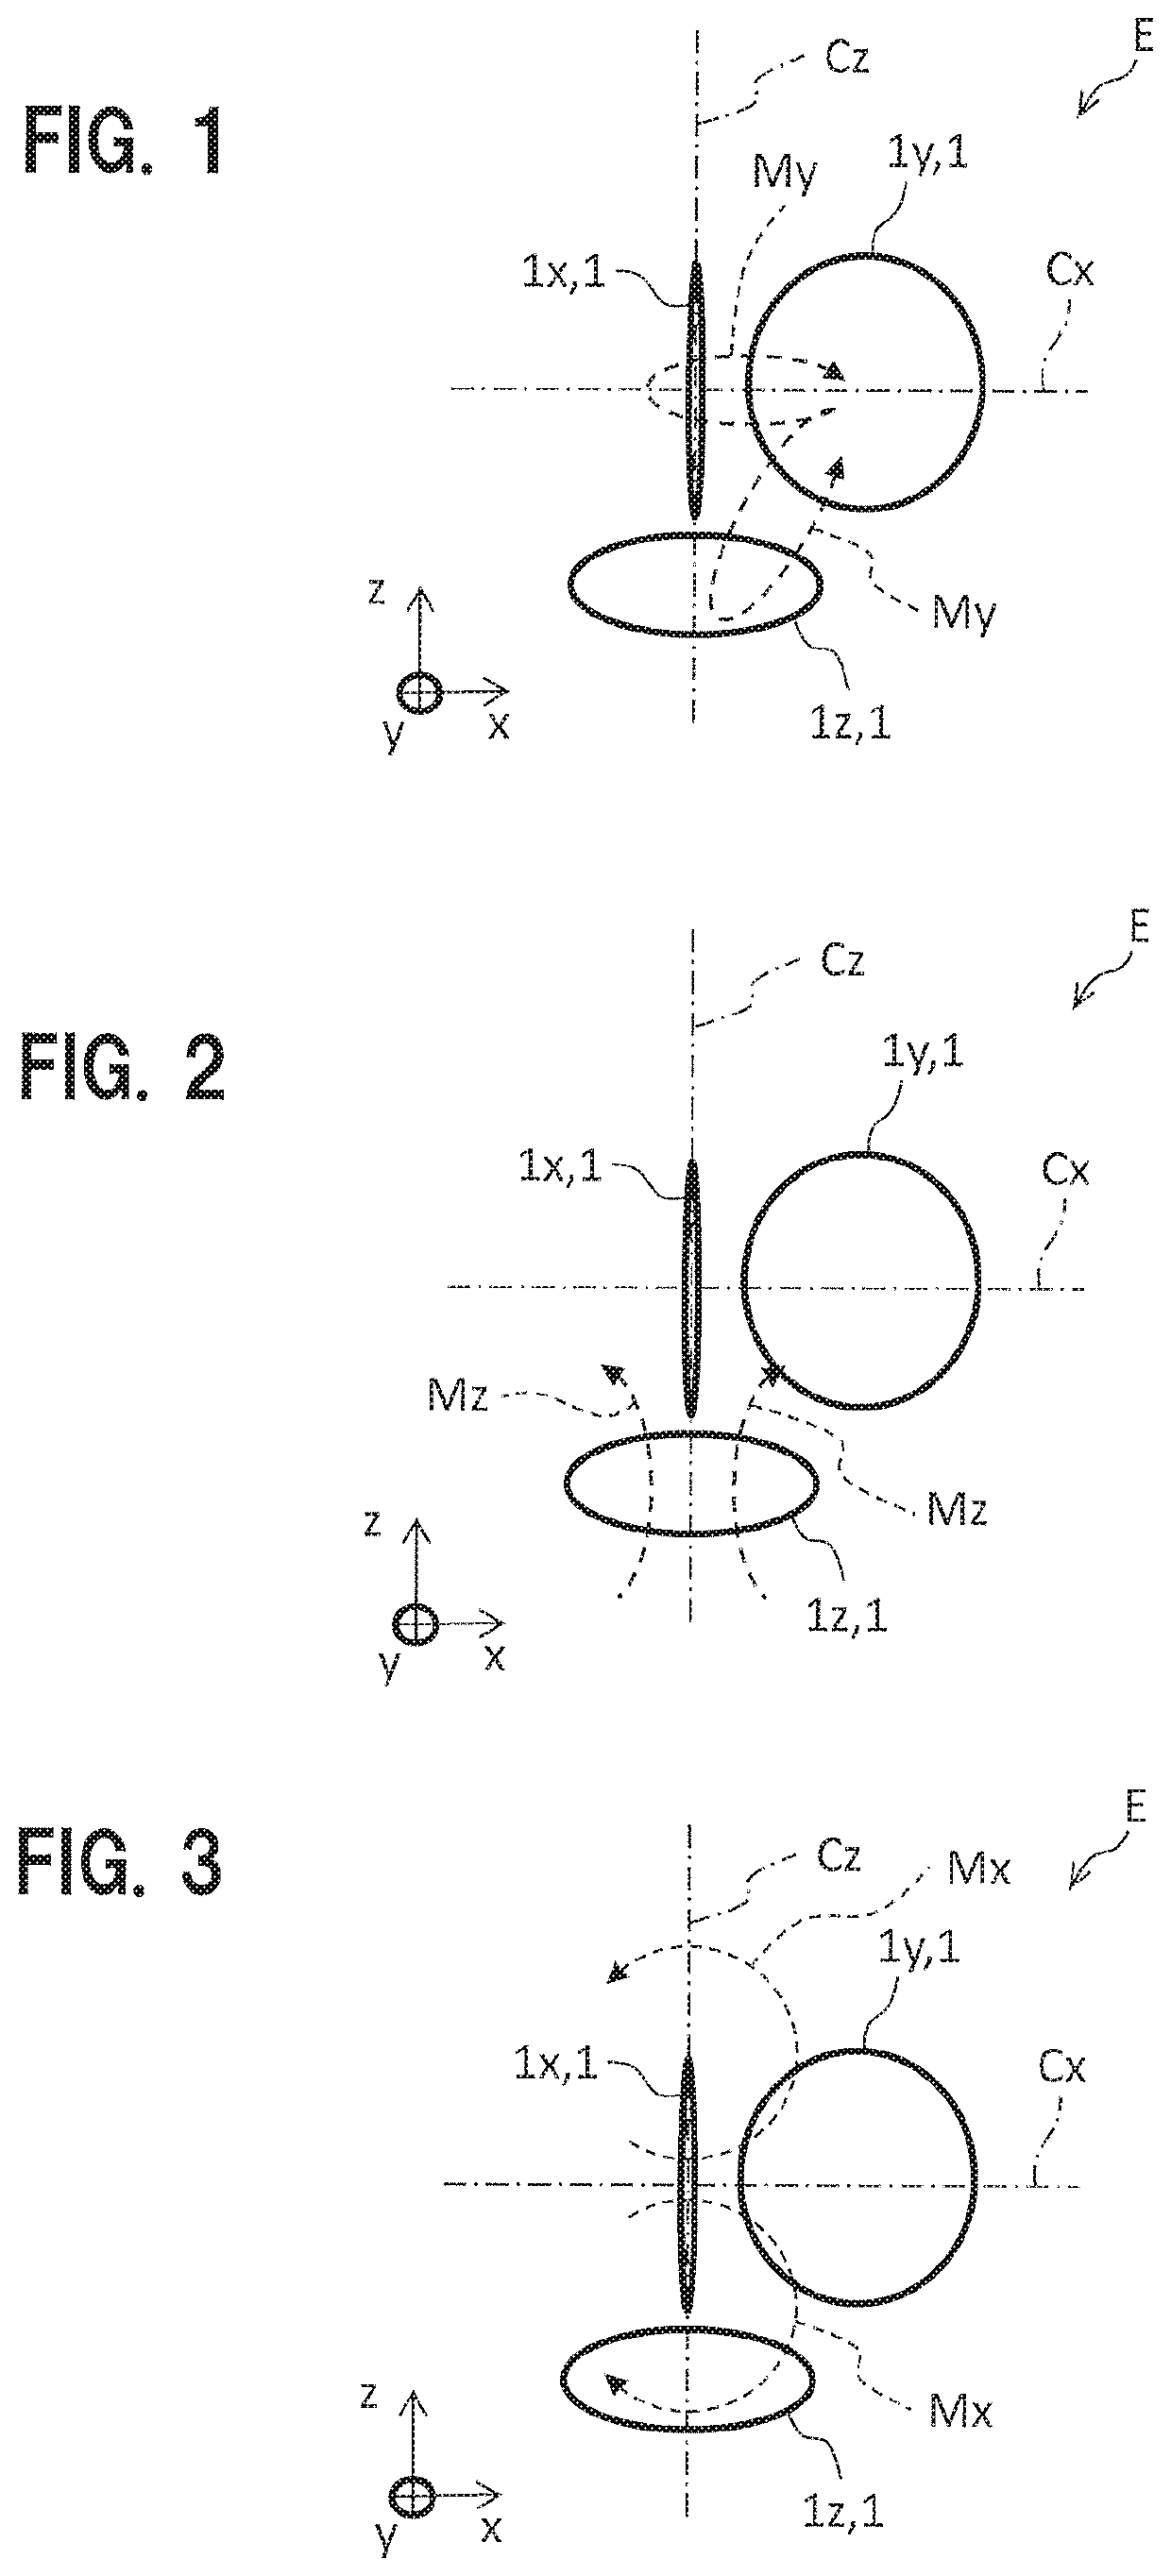 Magnetic field measuring element, magnetic field measuring device, and magnetic field measuring system